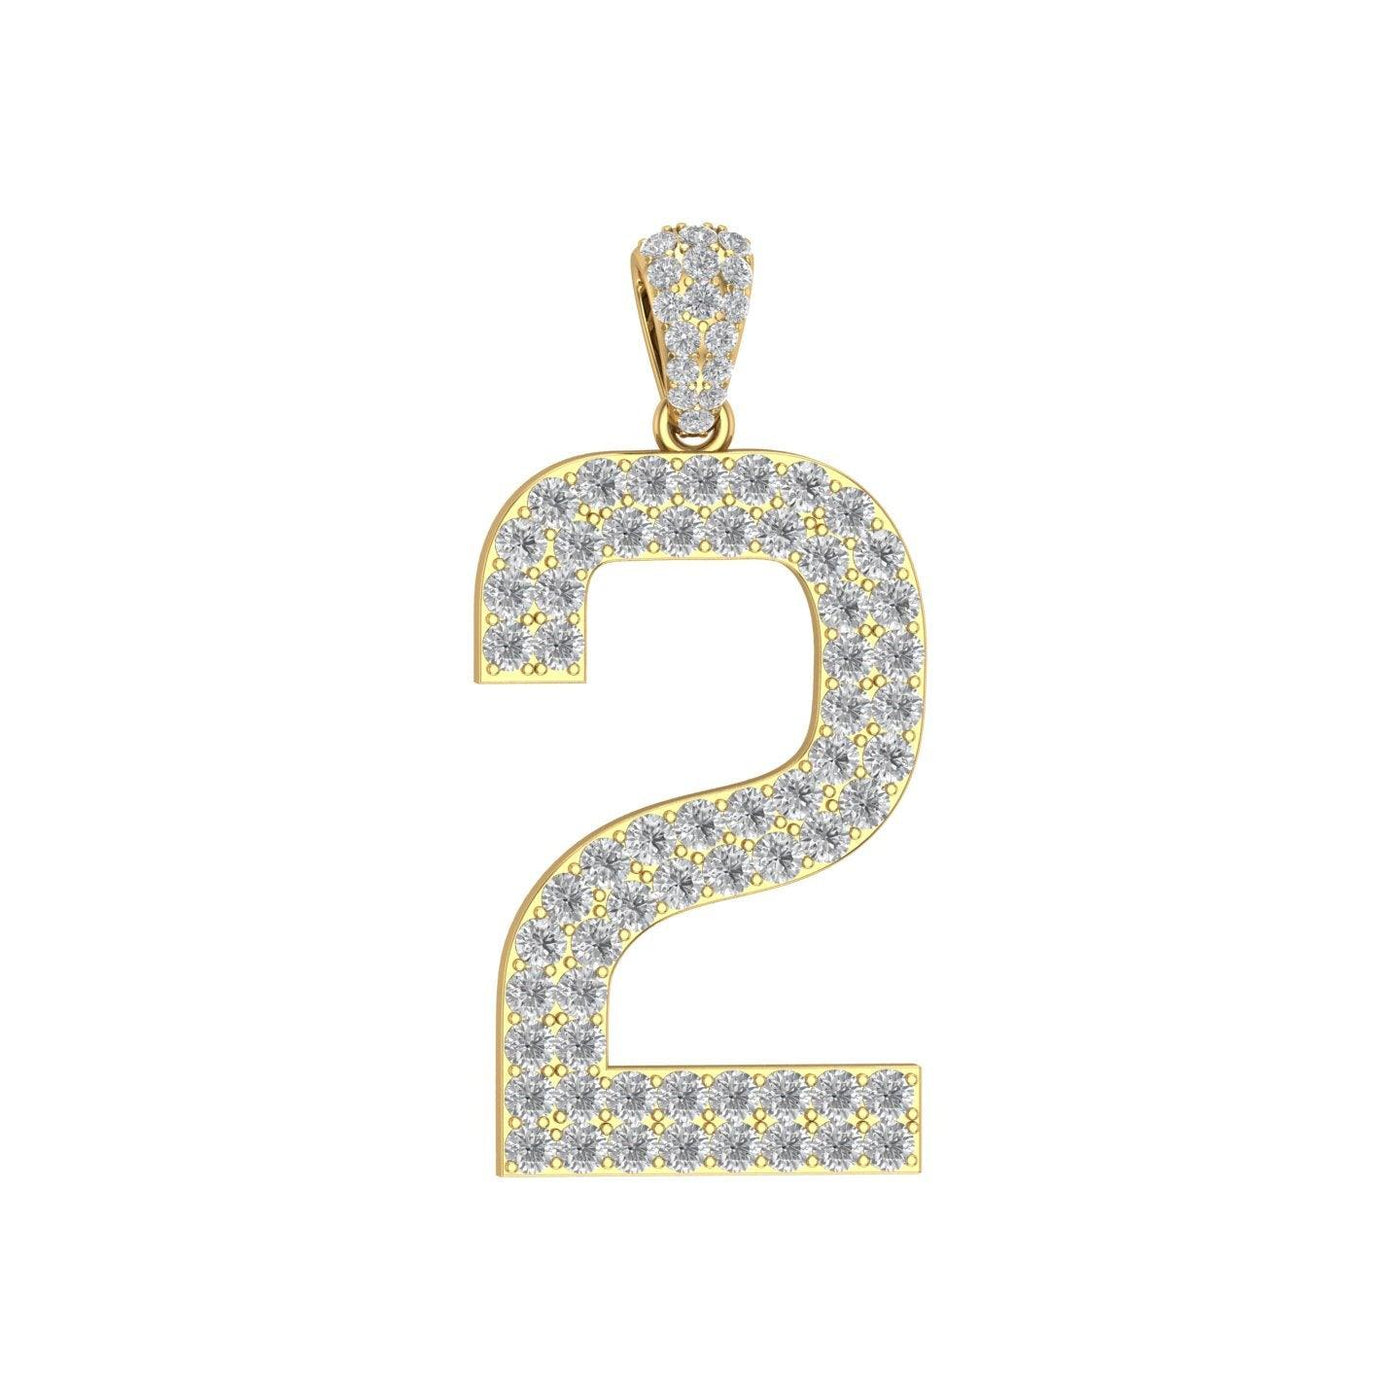 Gold Color Pendant in the Shape of 2 Made of 925 Sterling Silver Material with 20 Inch Long Silver Chain